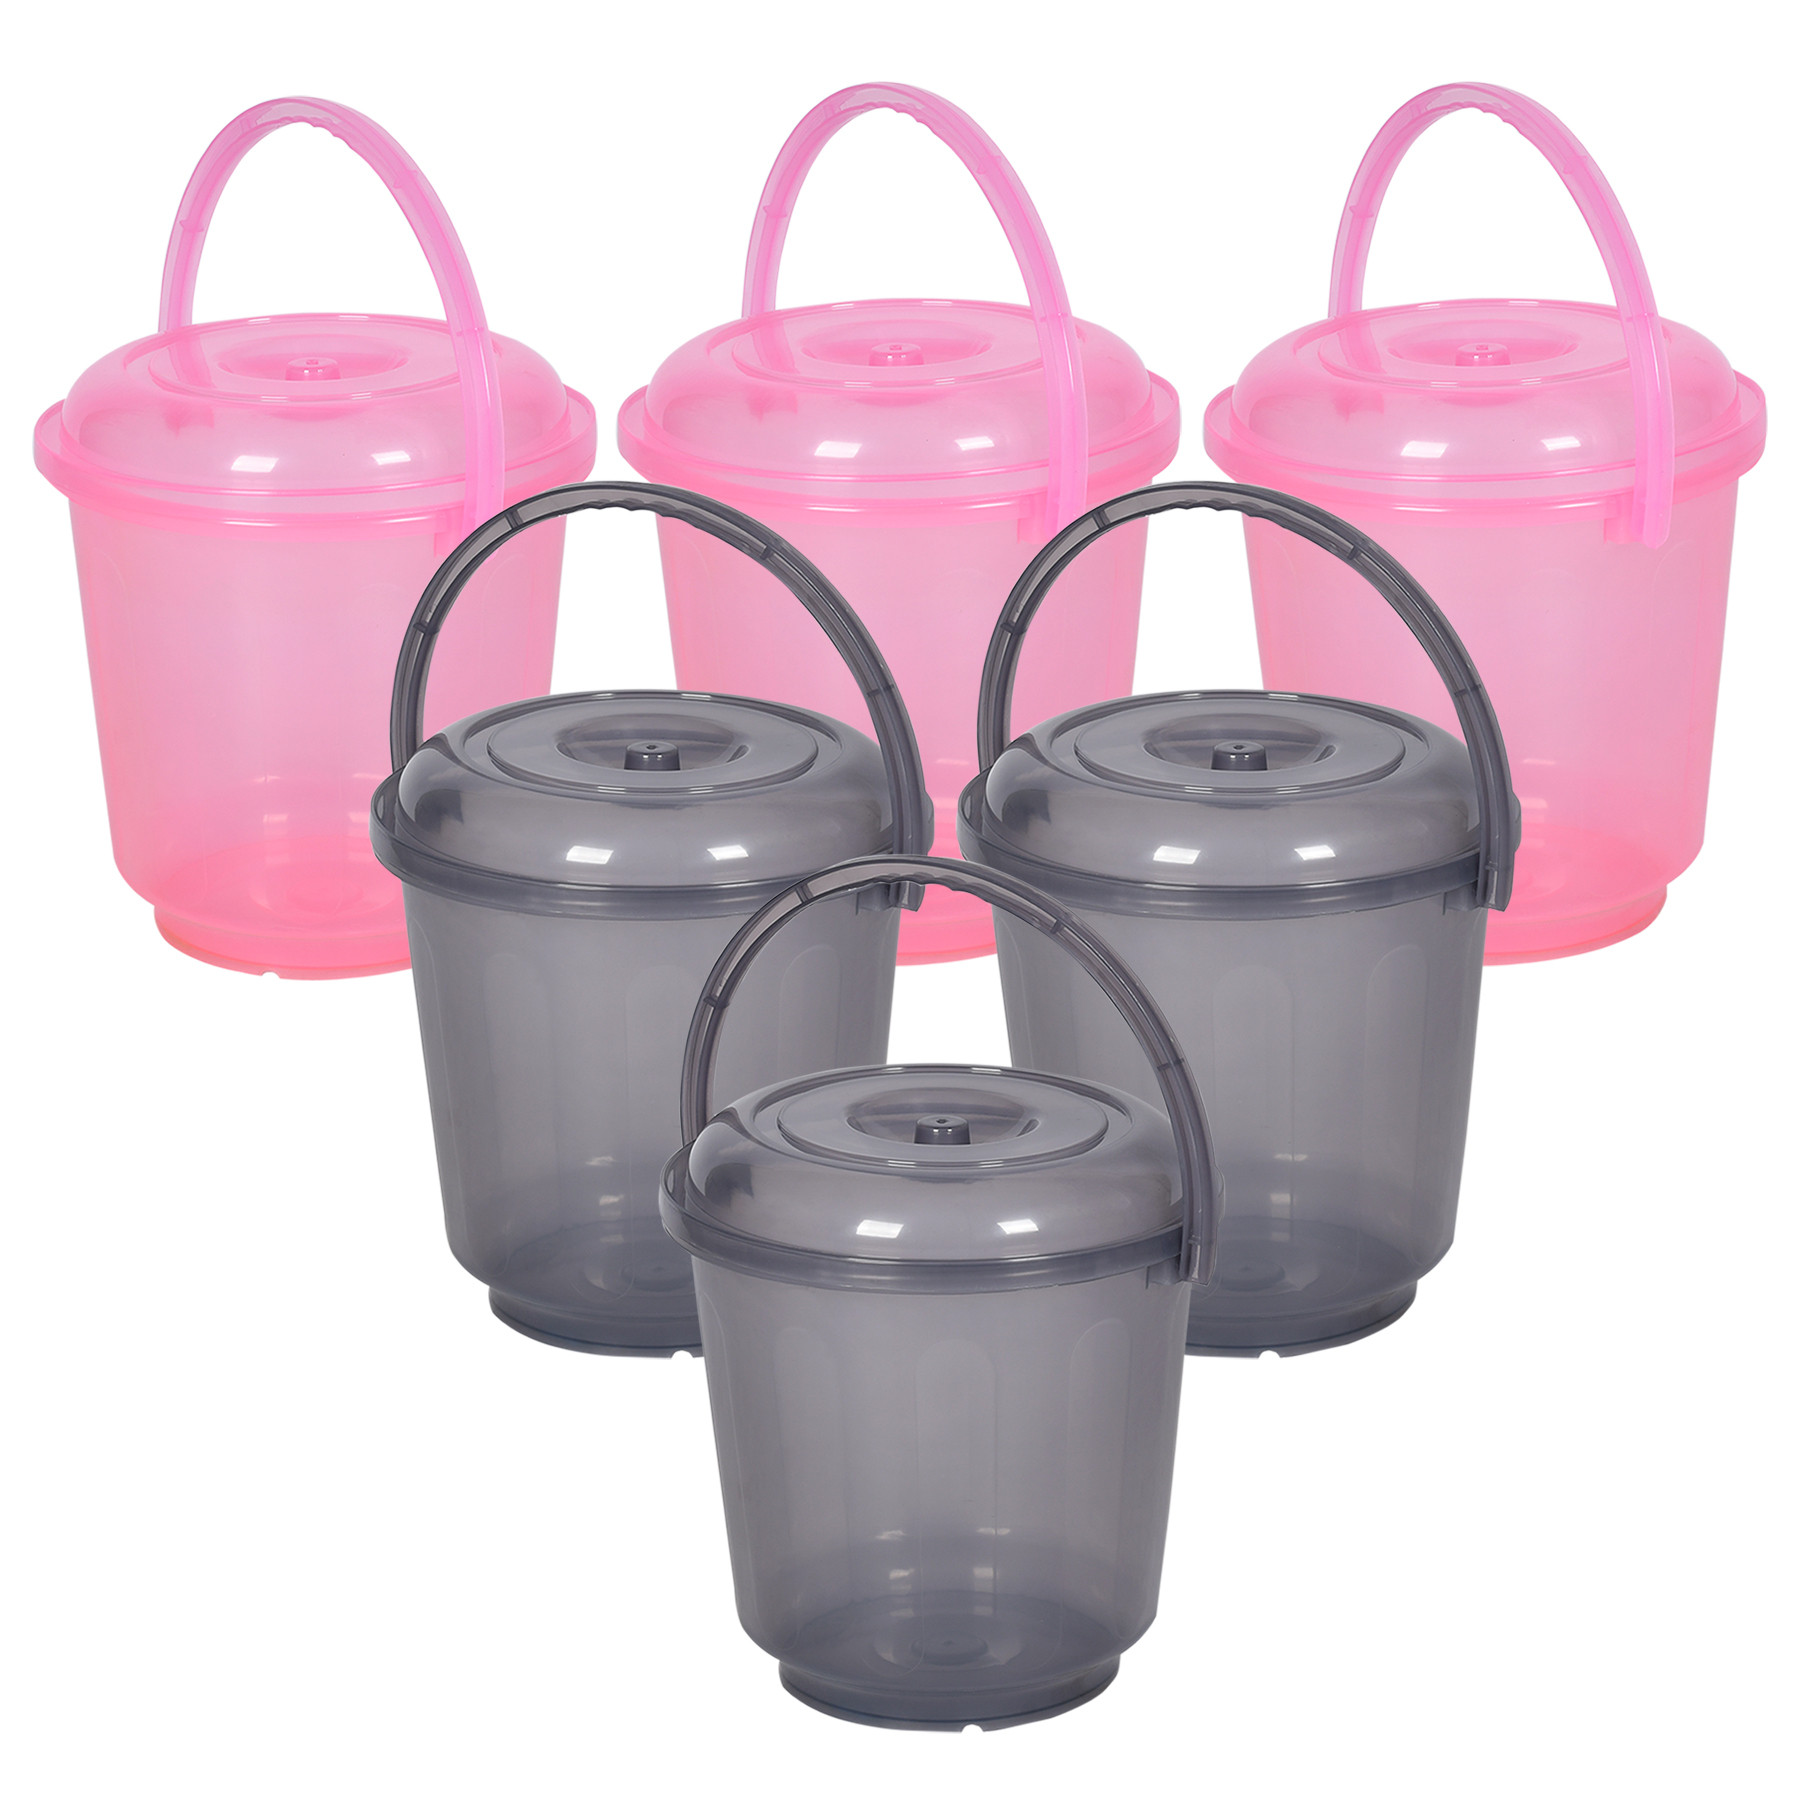 Kuber Industries Bucket | Bathroom Bucket | Utility Bucket for Daily Use | Water Storage Bucket | Bathing Bucket with Handle & Lid | 13 LTR | SUPER-013 | Transparent | Pink & Gray